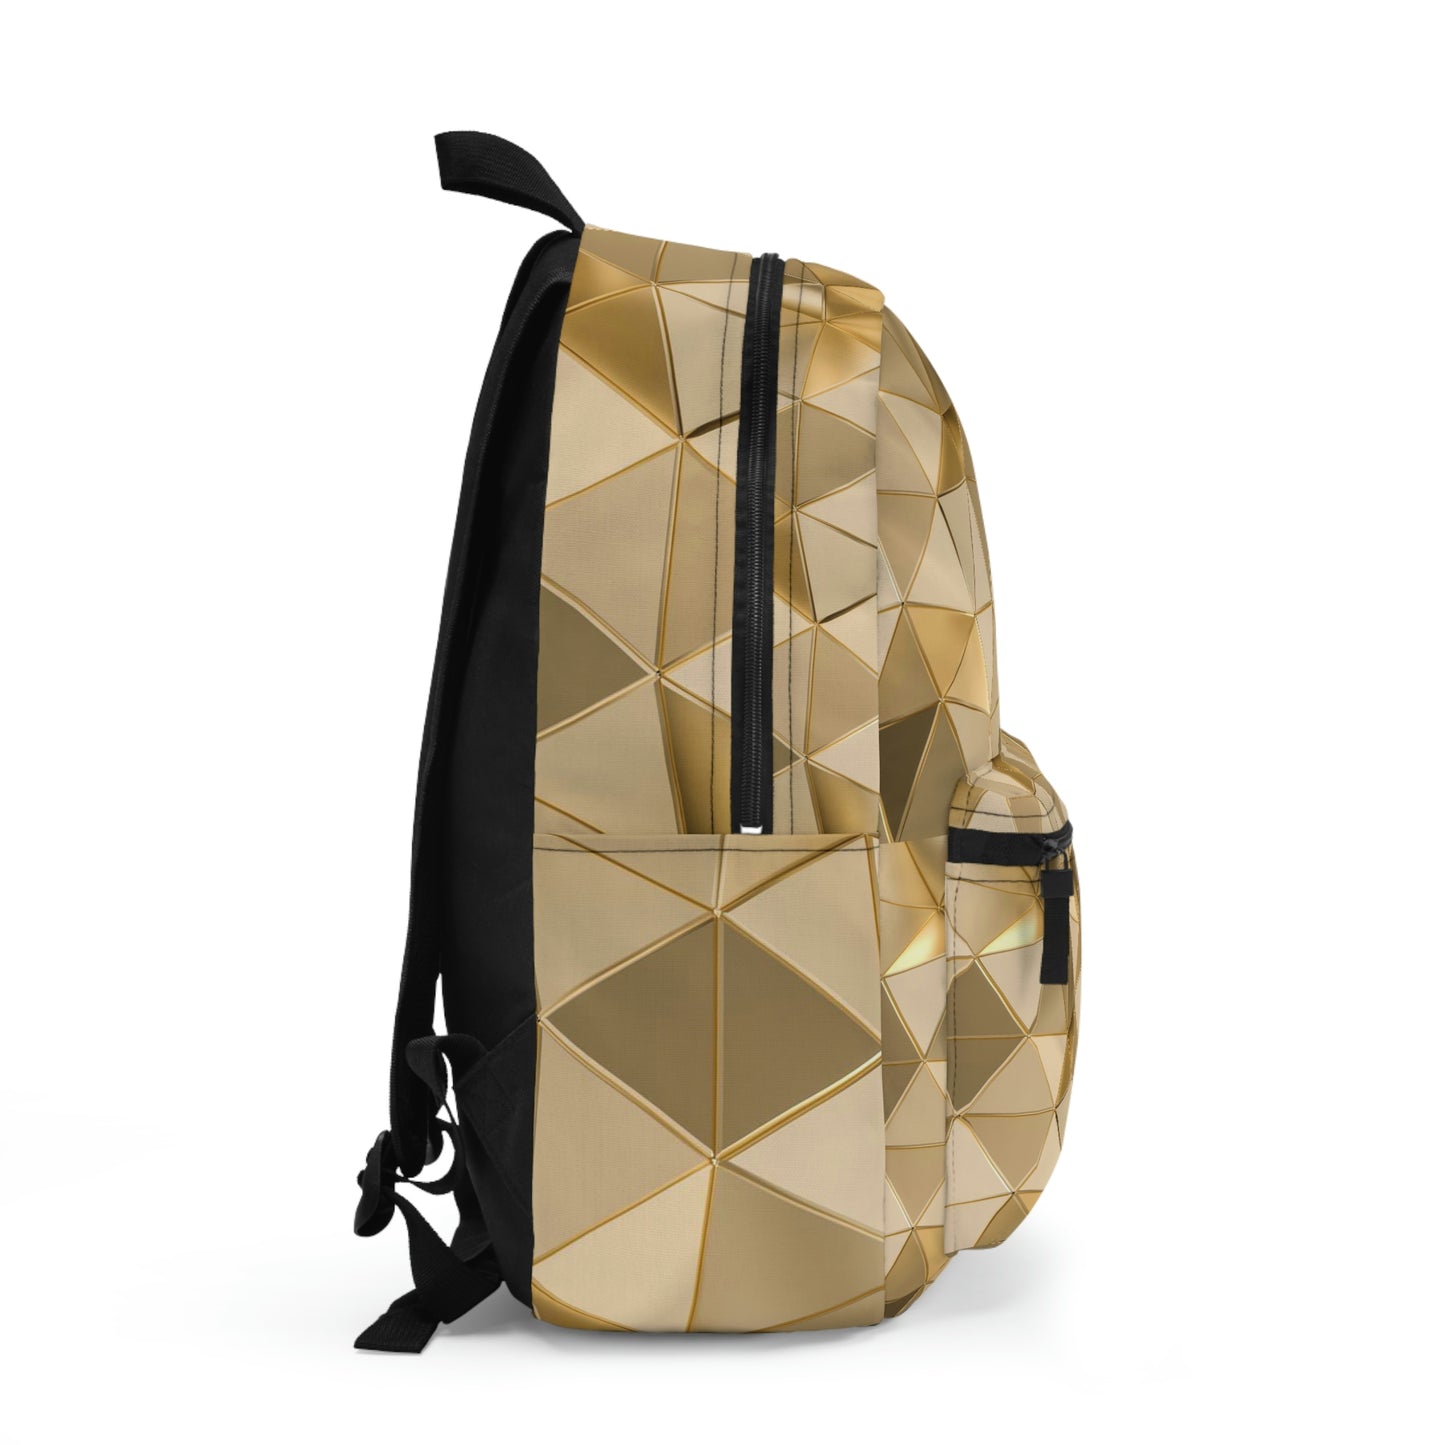 Gold Pyramide Backpack